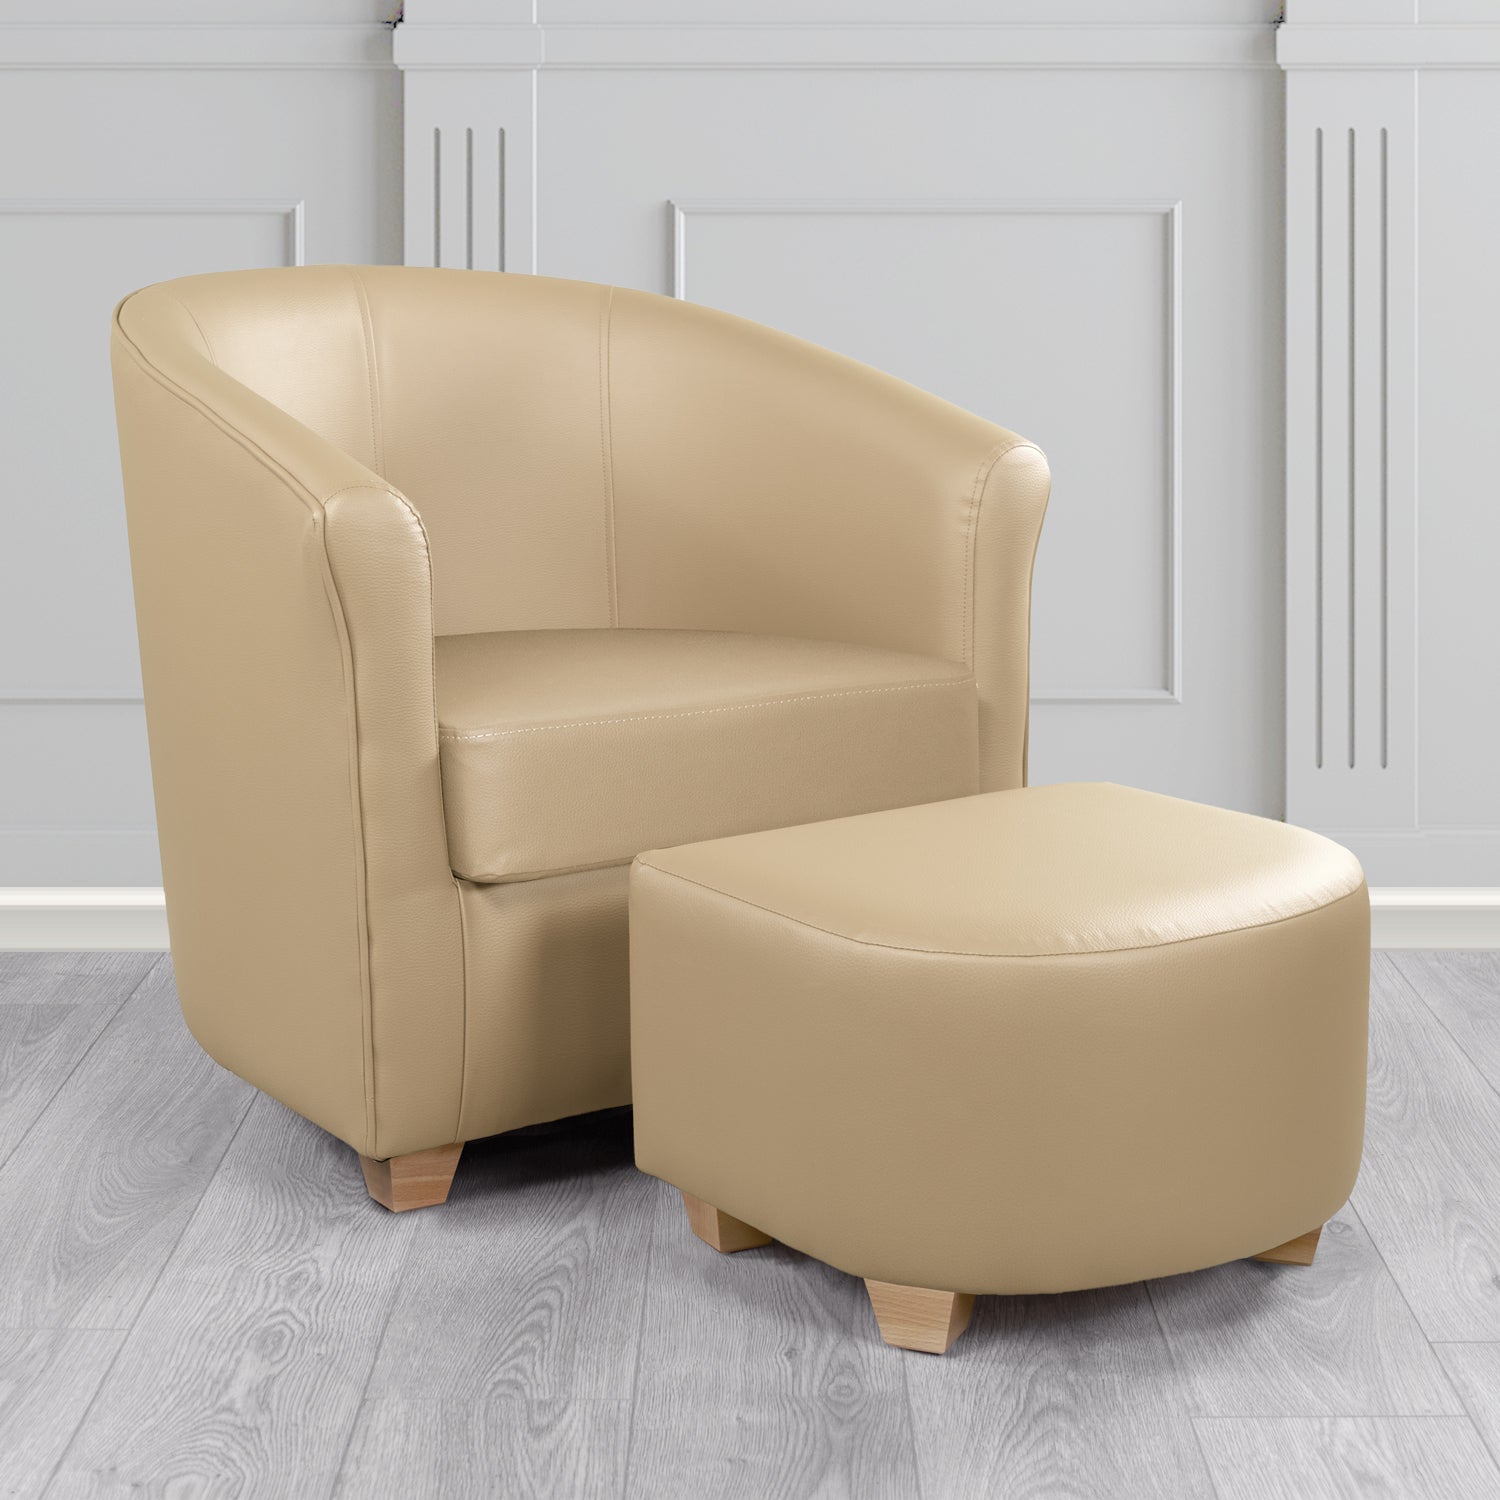 Cannes Tub Chair with Footstool Set in Just Colour Almond Crib 5 Faux Leather - The Tub Chair Shop